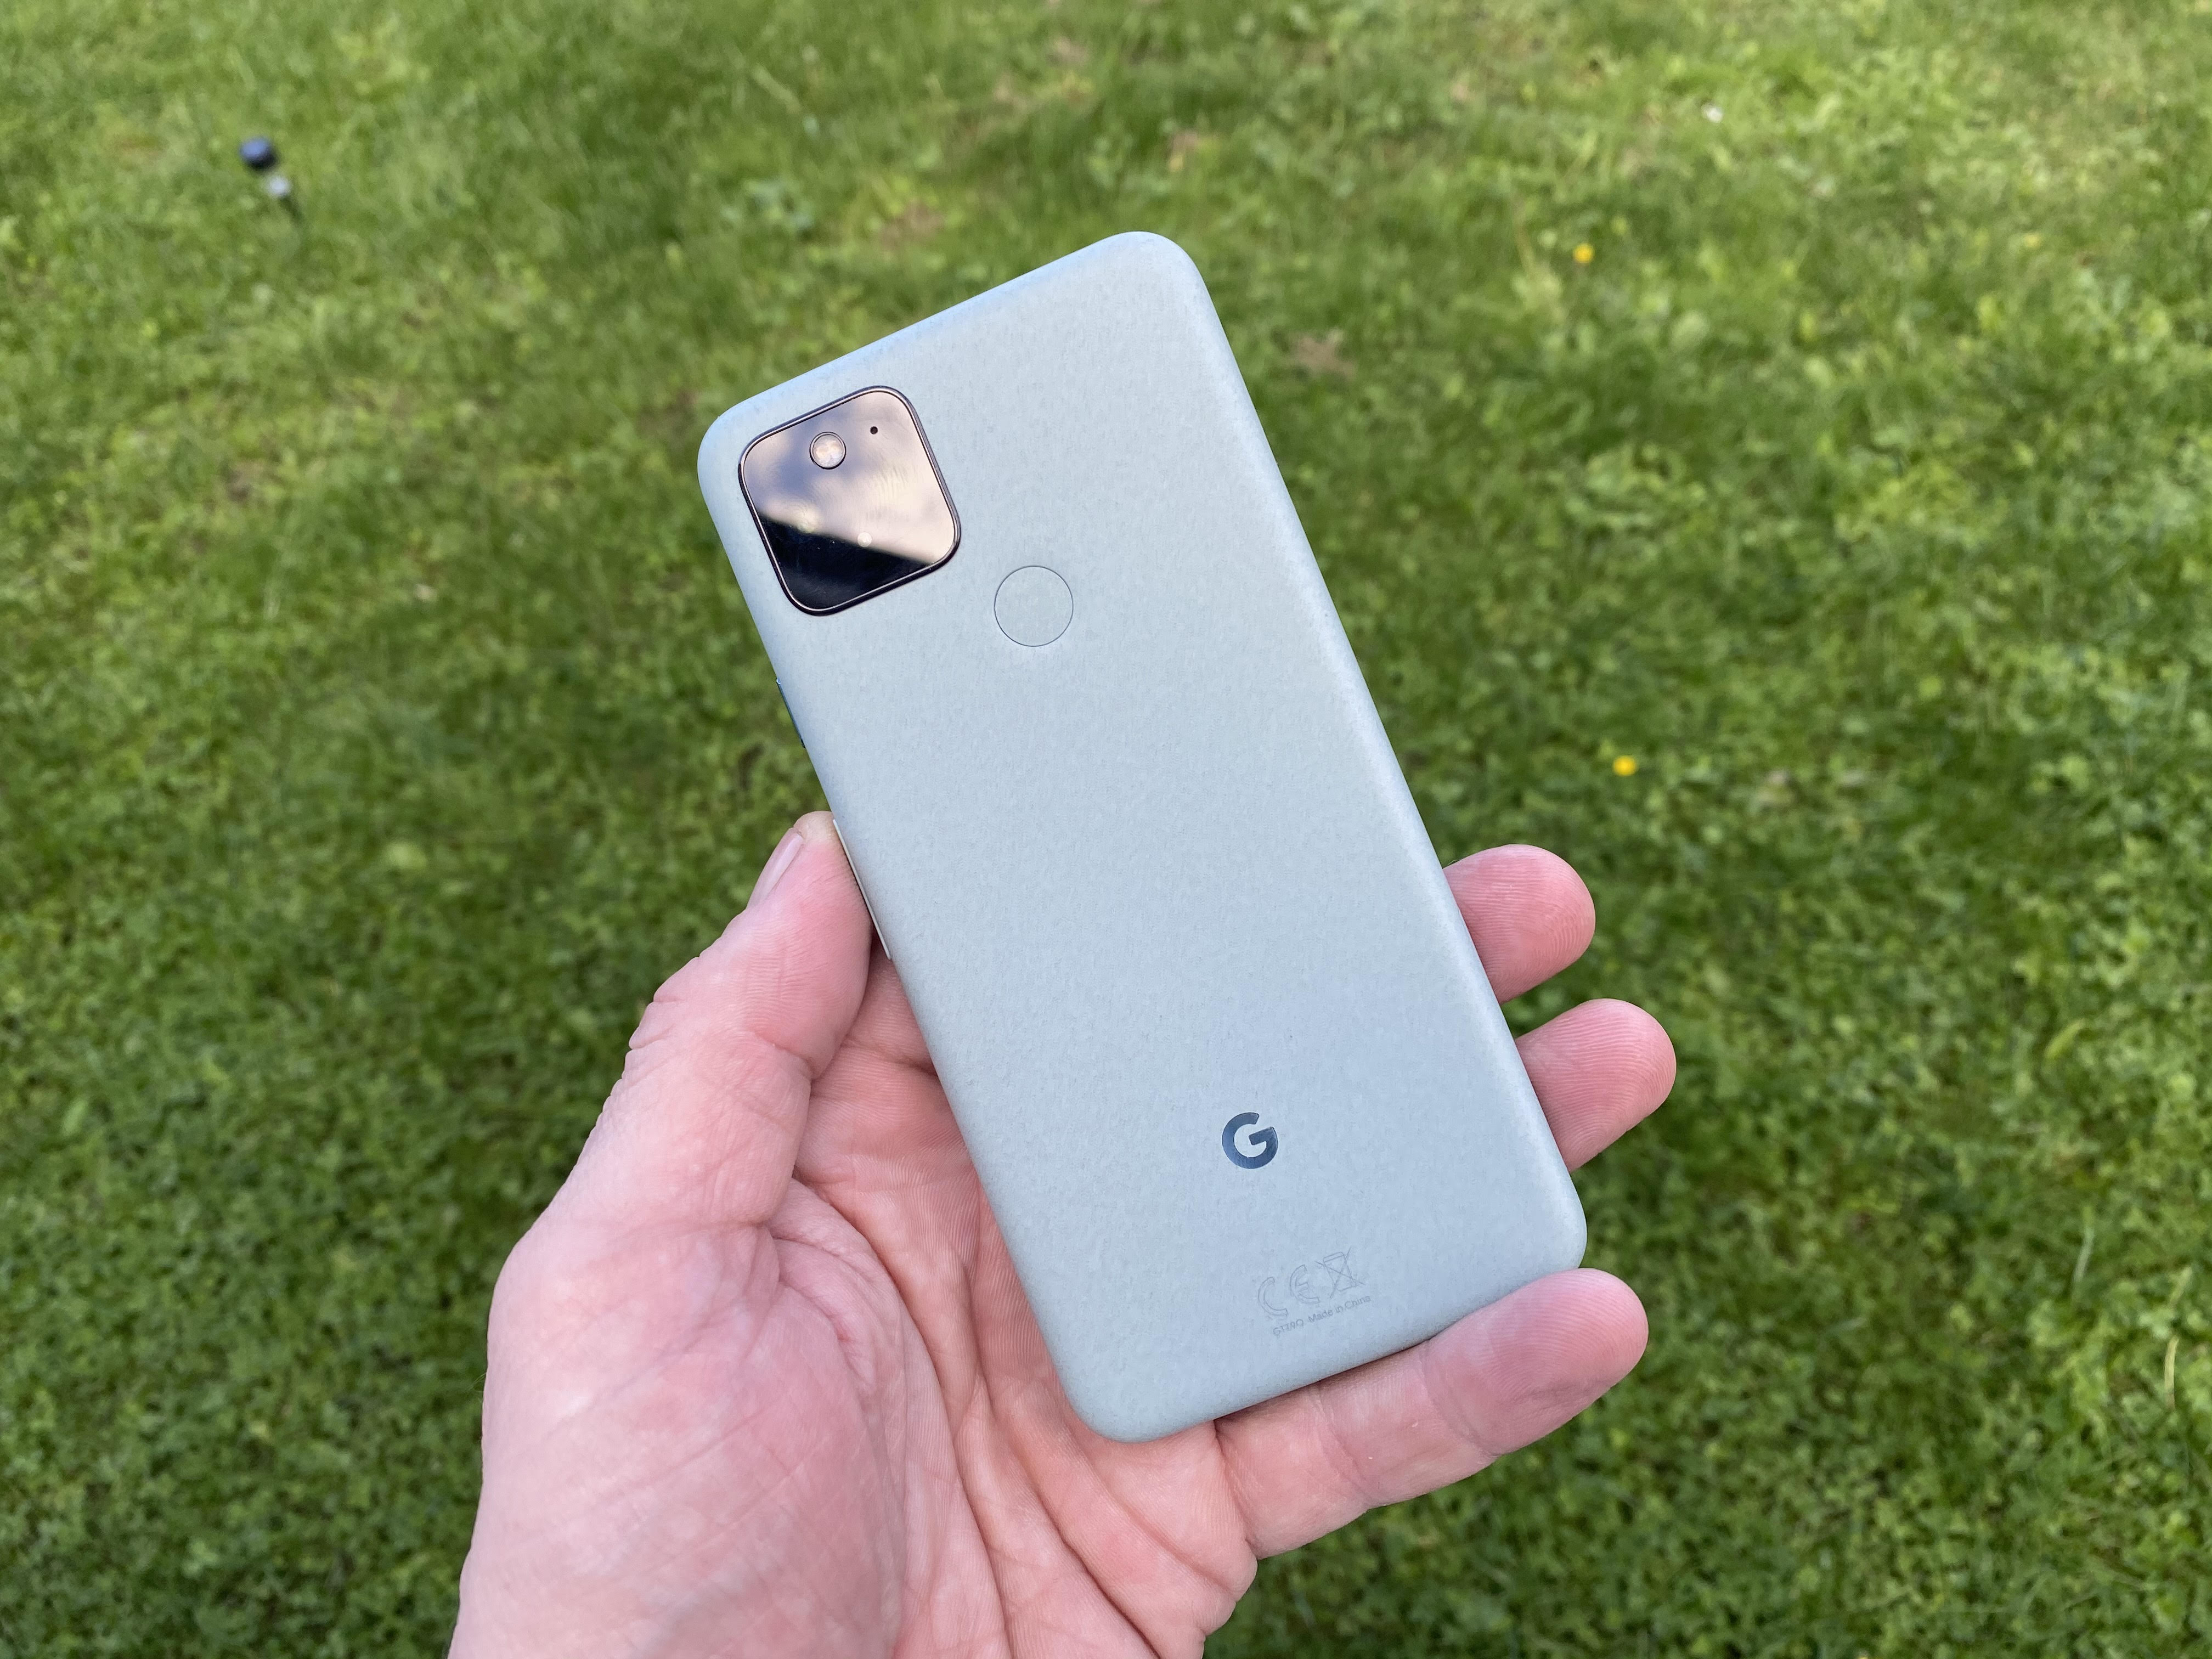 Unboxing, walkthrough first impressions – The Google Pixel 5 5G in